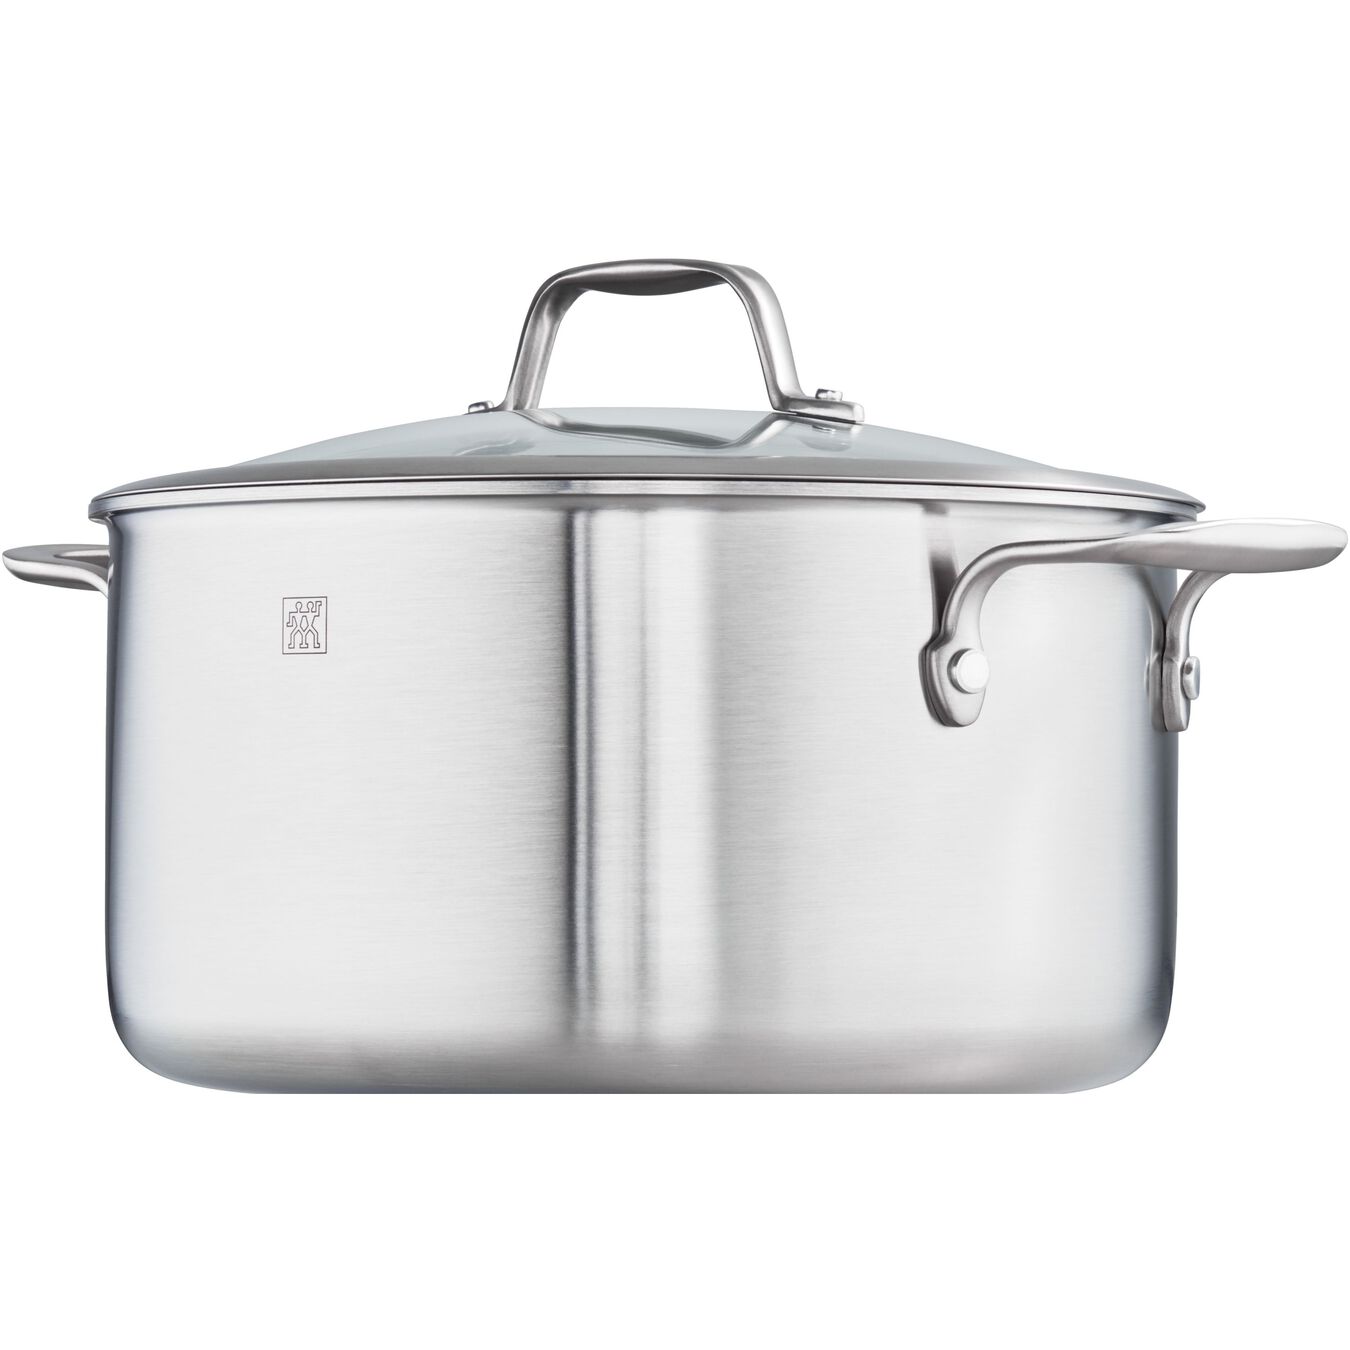 Zwilling Spirit Stainless 6 Qt Dutch Oven Official Zwilling Shop